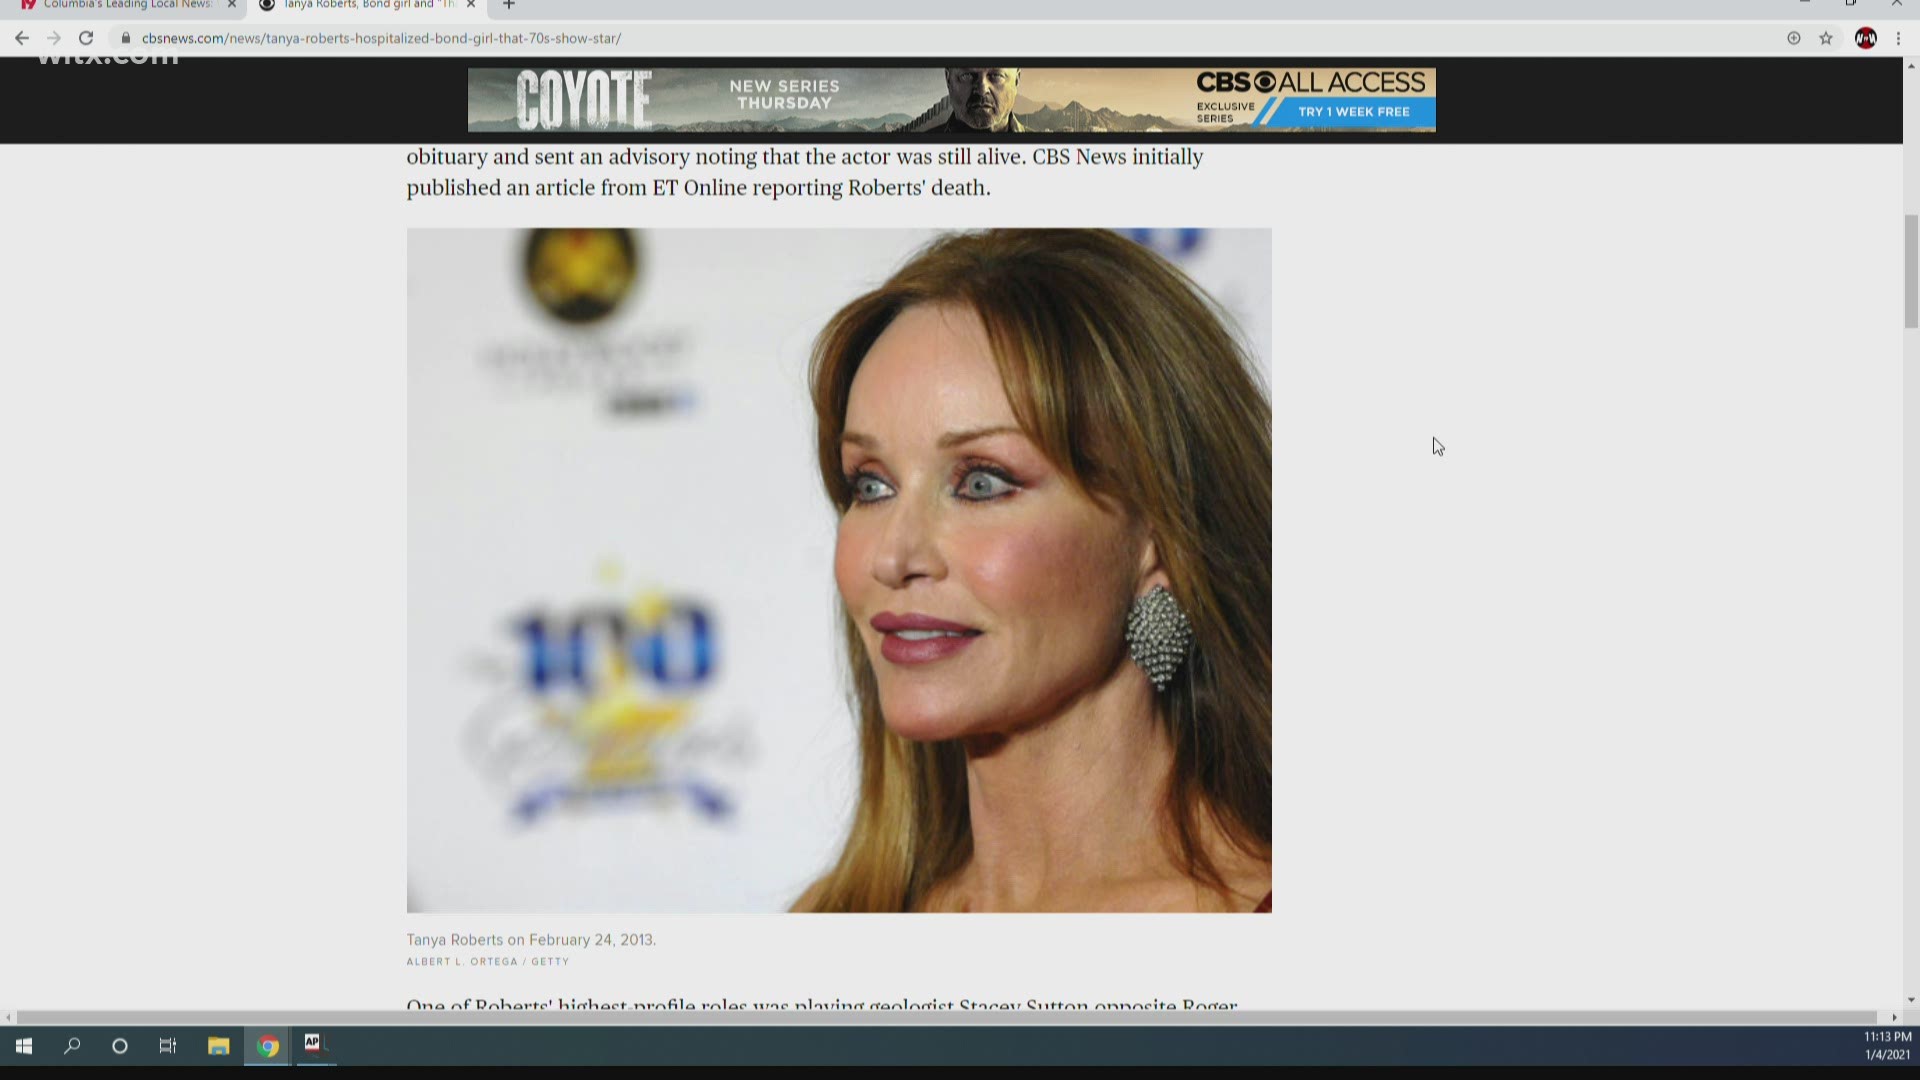 Actress Tanya Roberts had mistakenly been reported dead by her publicist earlier Monday.